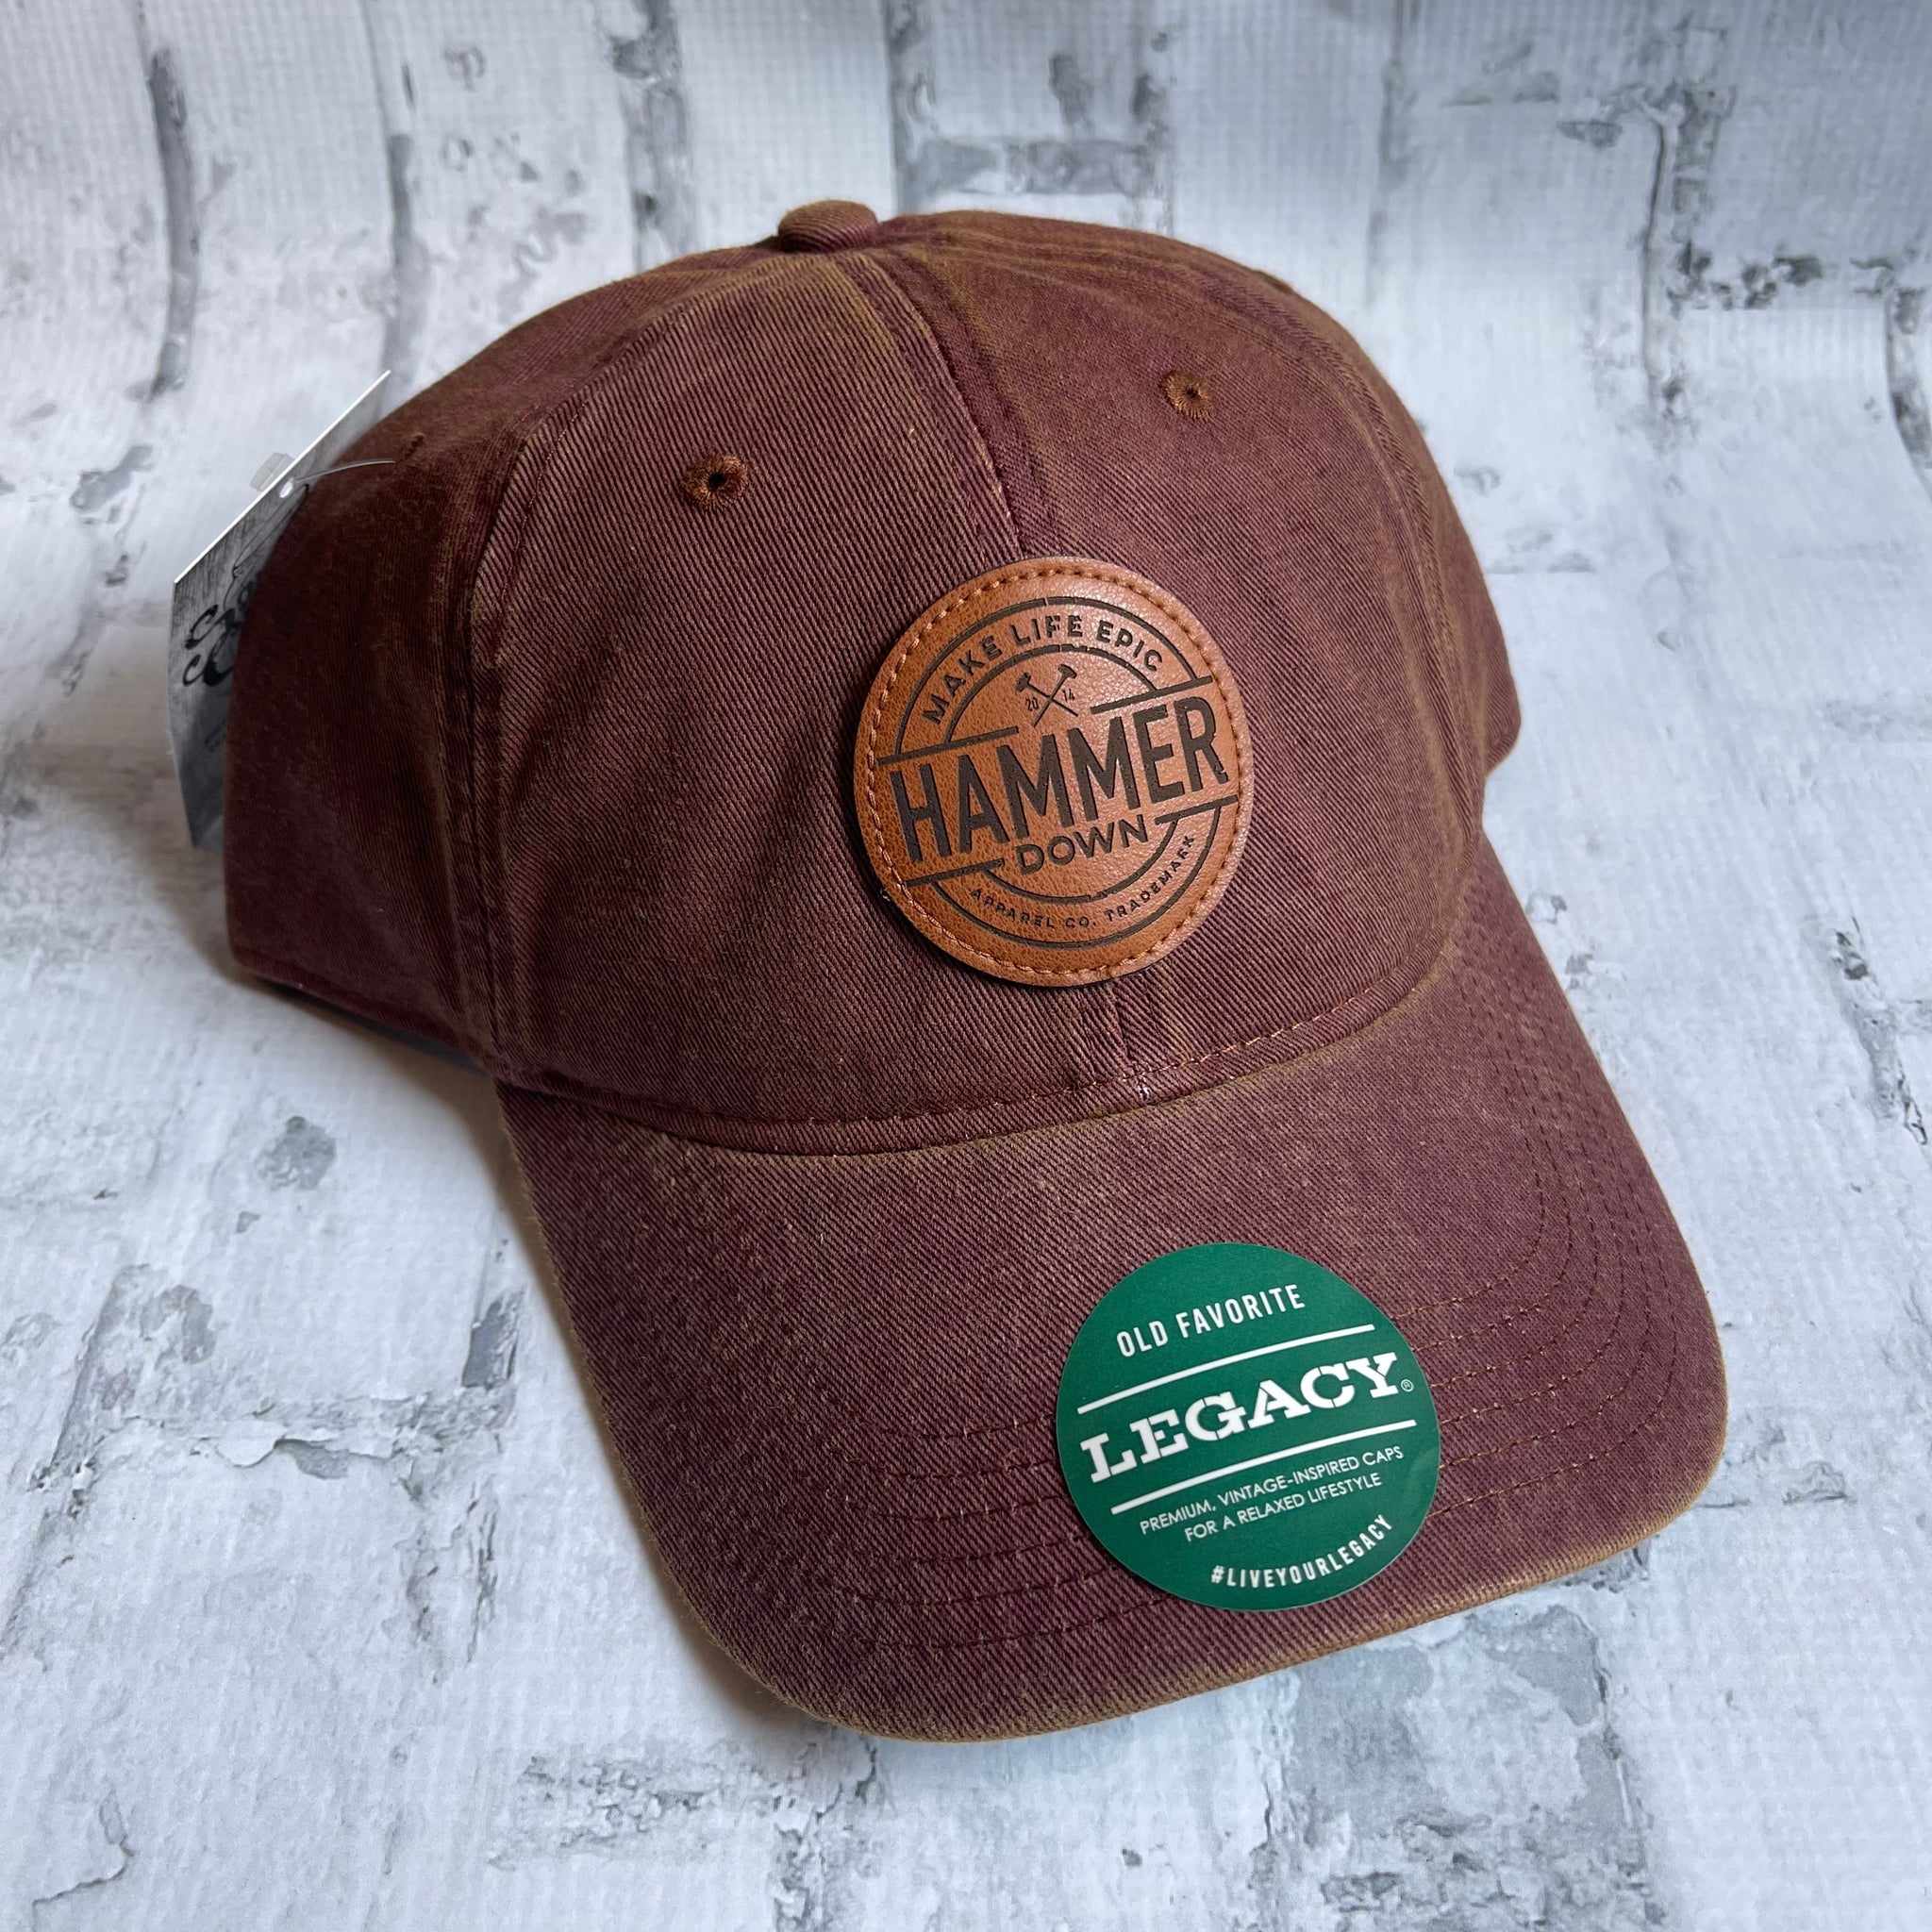 Hammer Down "MLE Badge" Hat - Maroon with Leather Patch - Southern Charm "Shop The Charm"